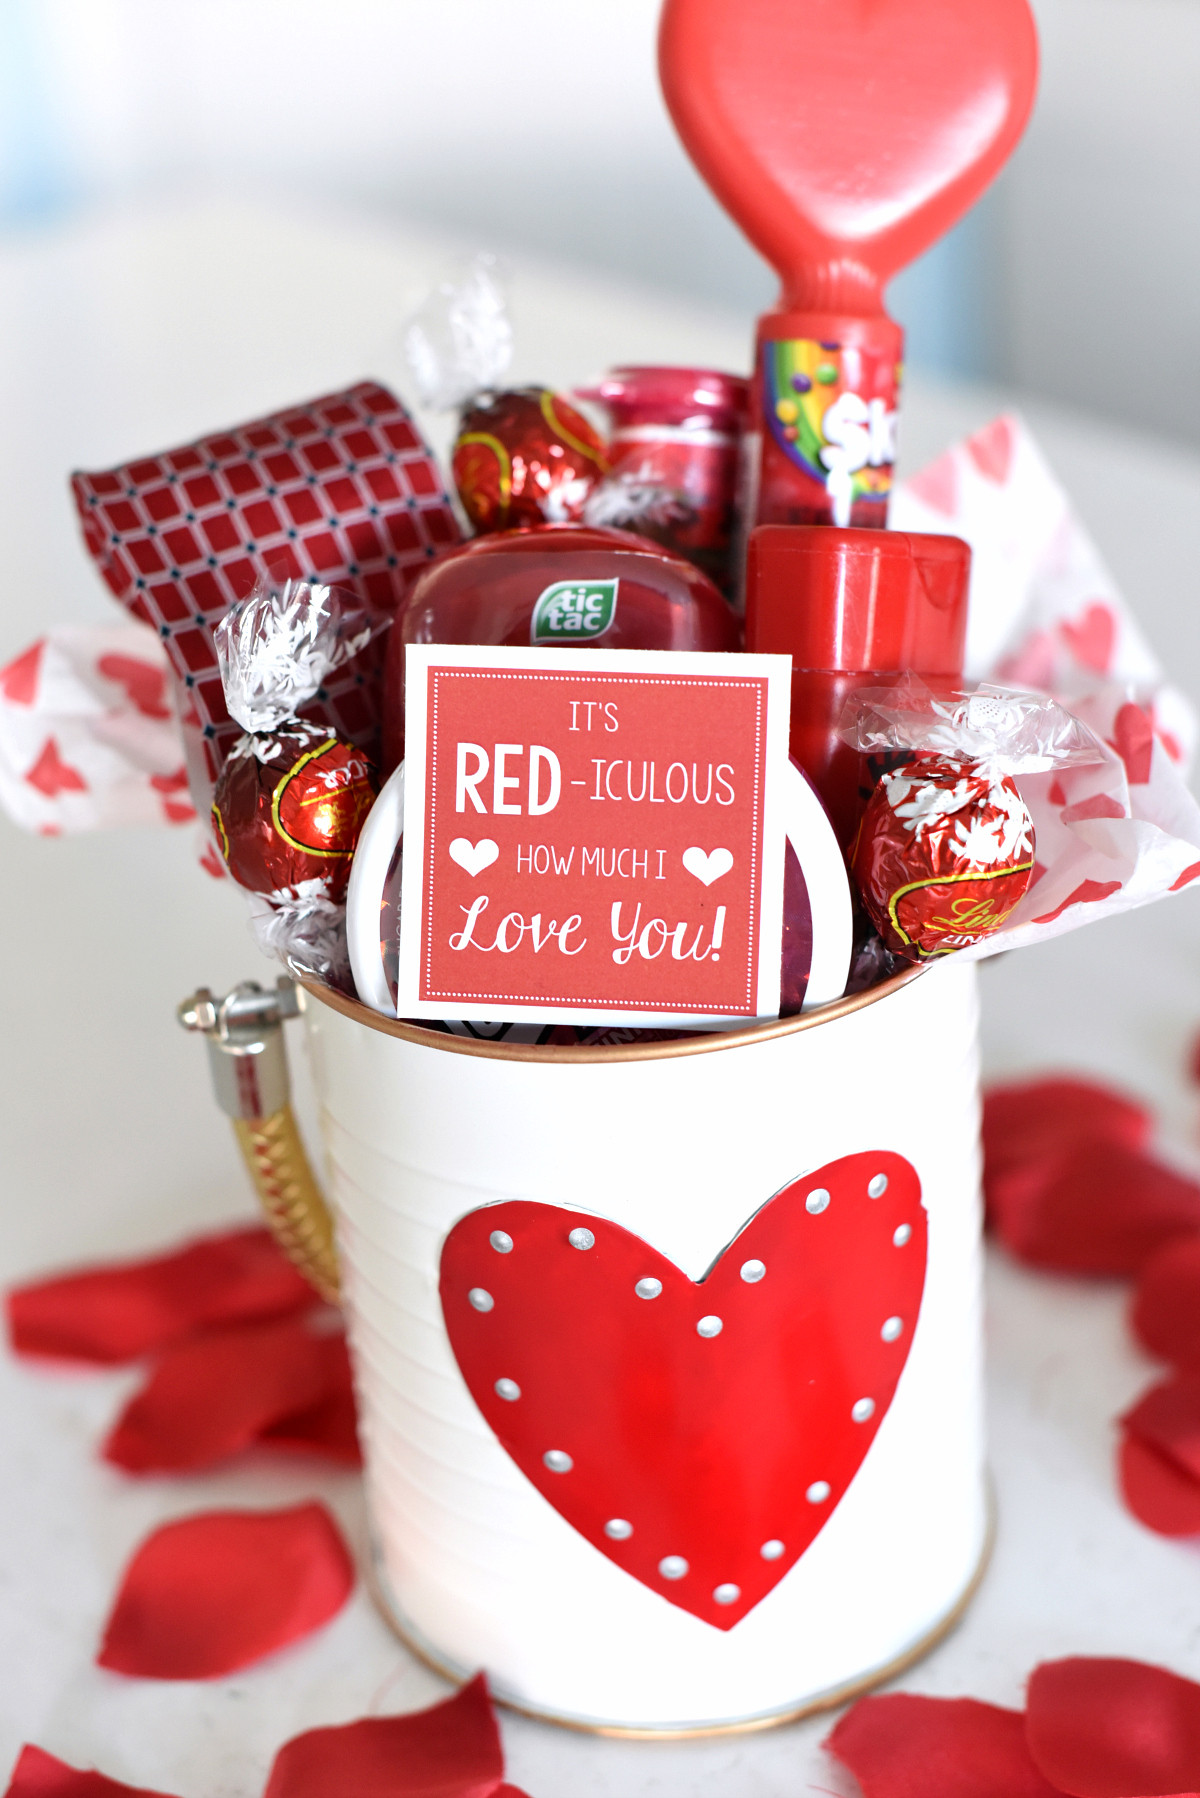 Valentines Gift For Him Ideas
 Cute Valentine s Day Gift Idea RED iculous Basket